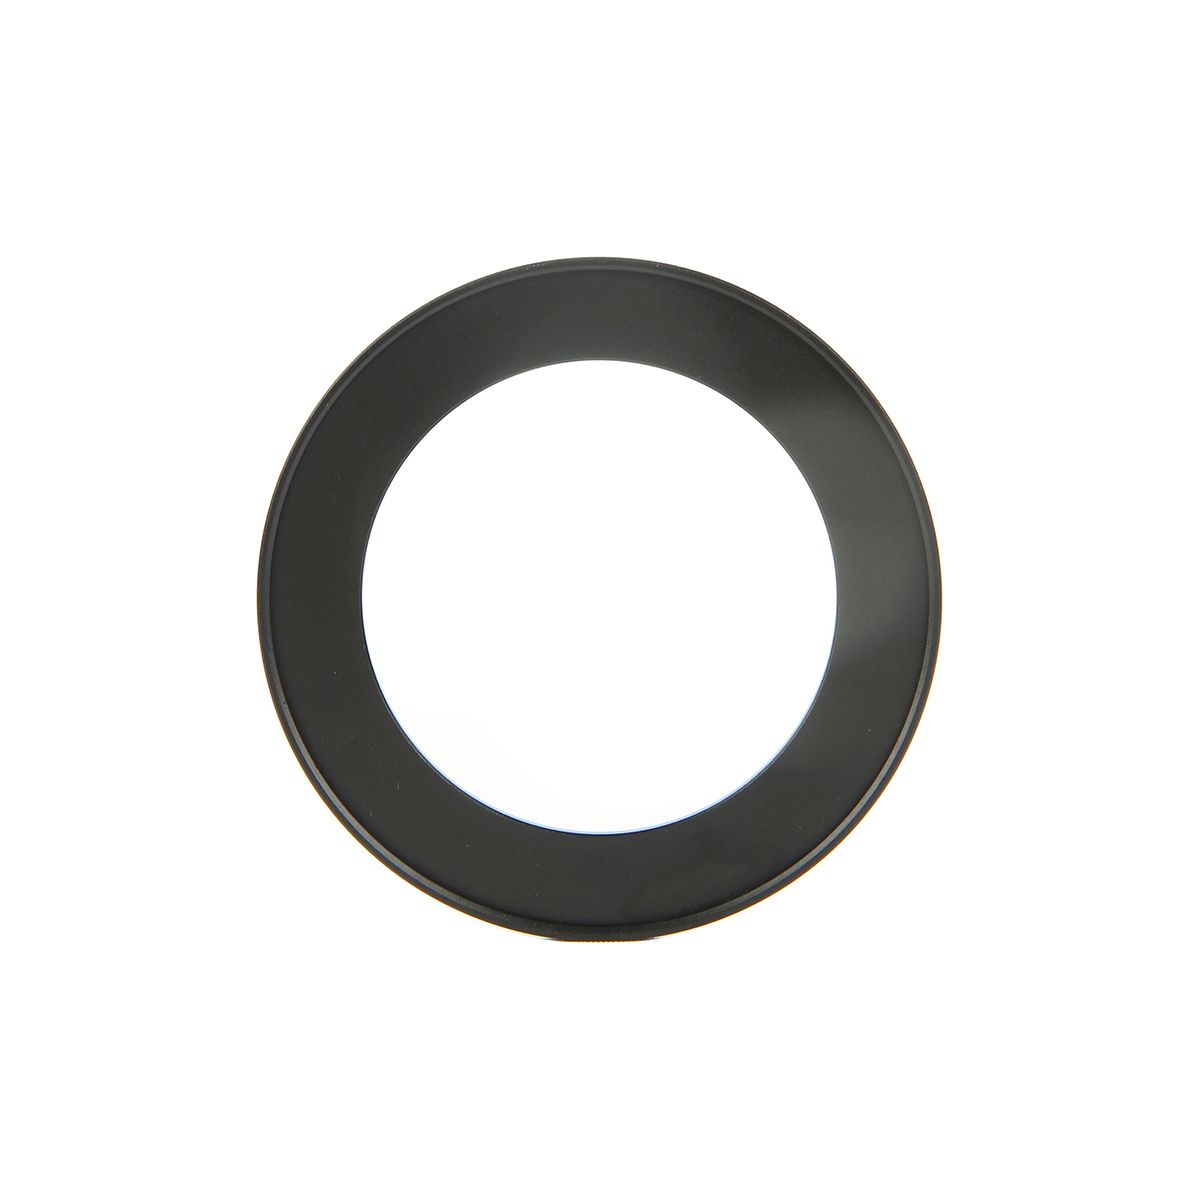 Caruba Step-up/down Ring 60mm - 67mm